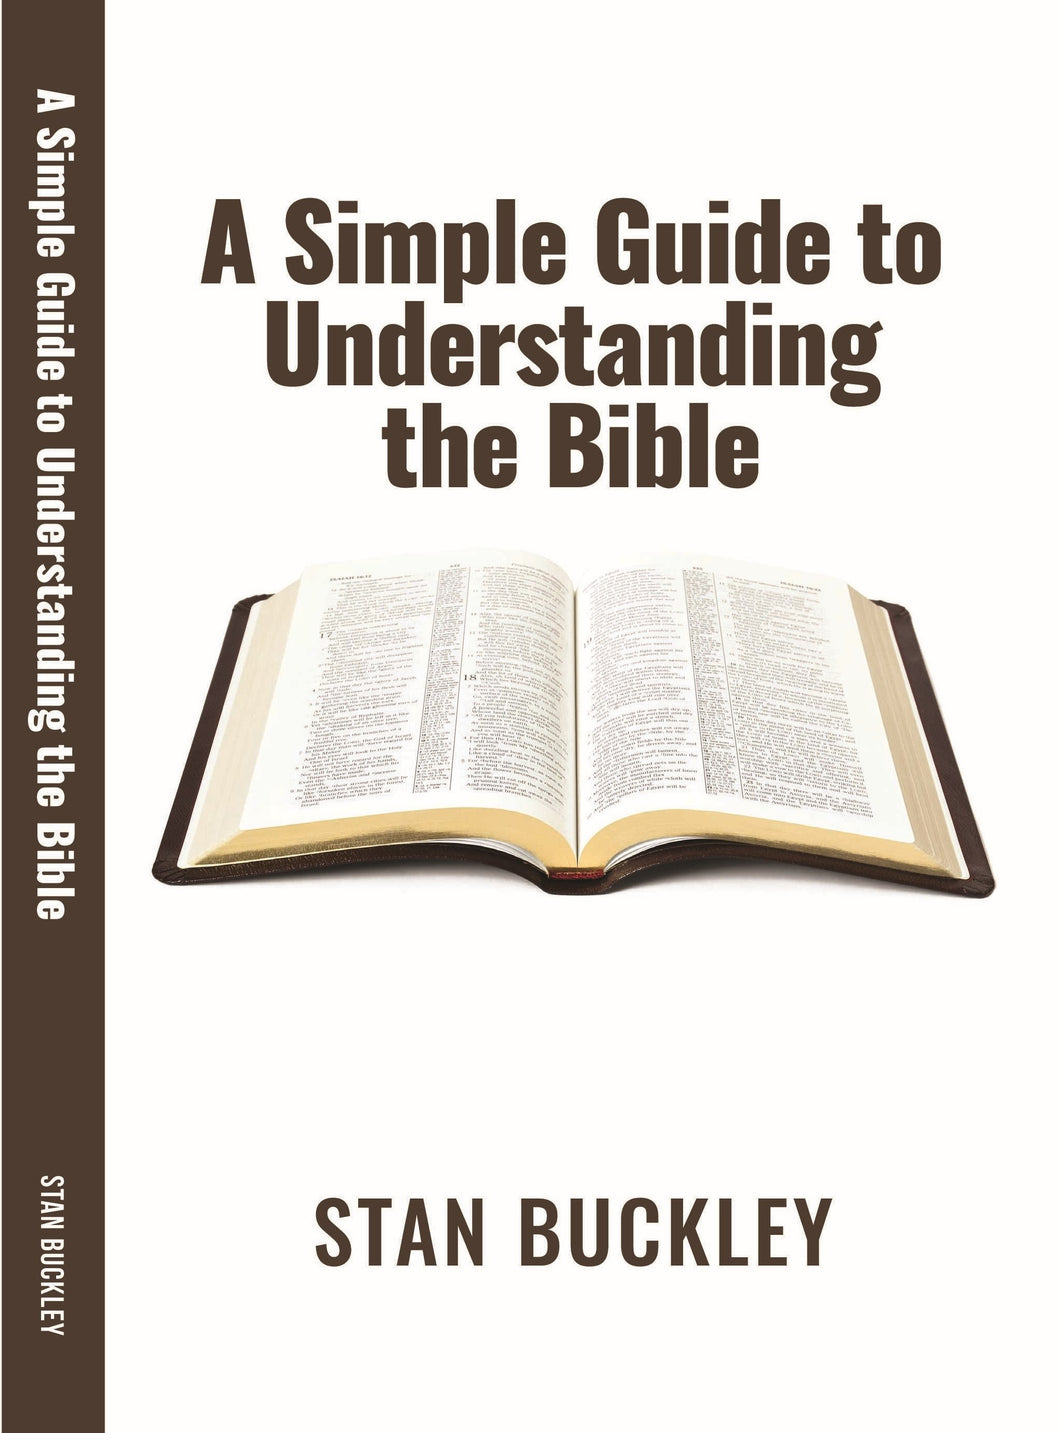 A Simple Guide To Understanding the Bible